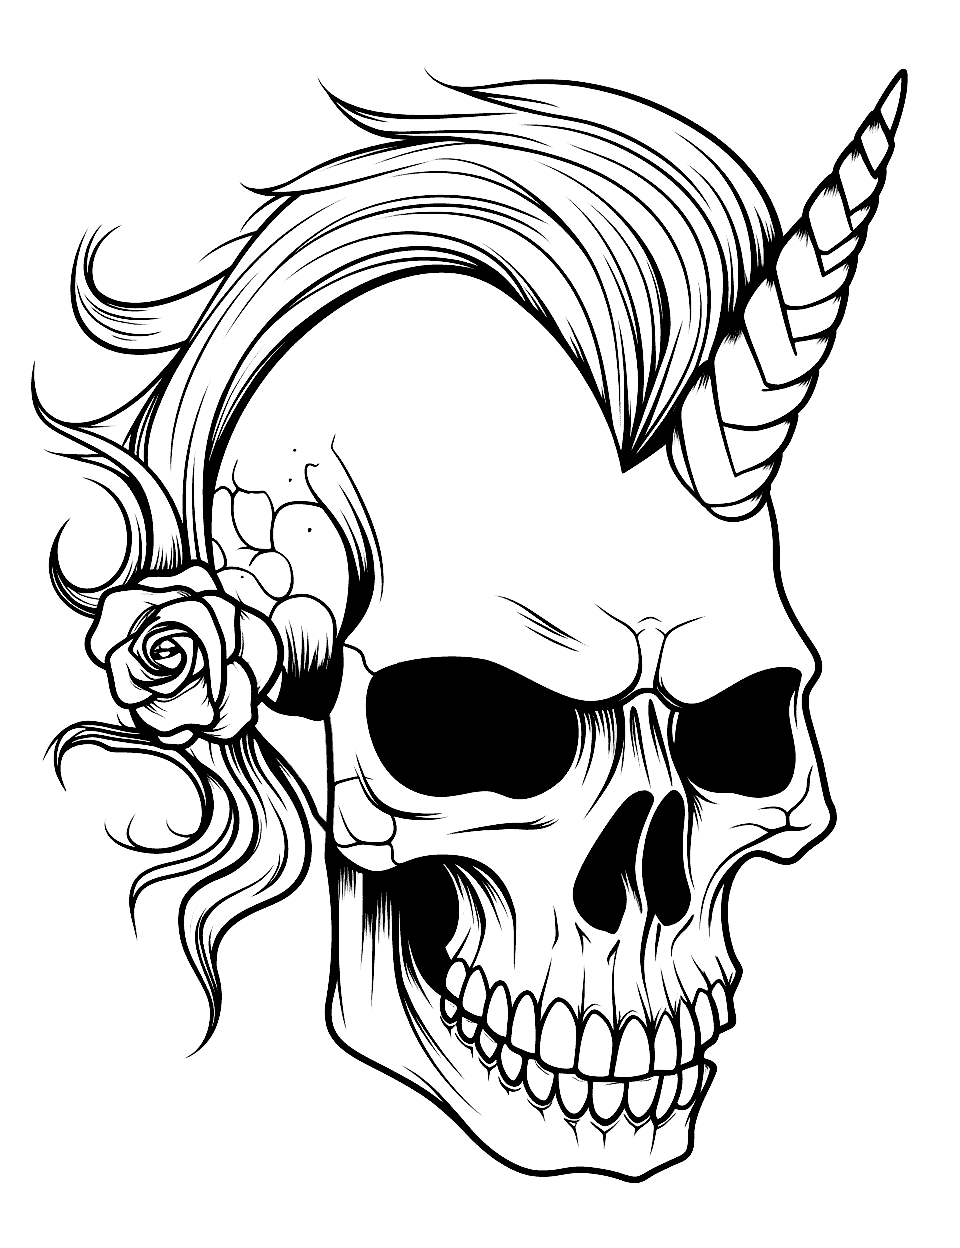 Mythical Unicorn Skull Coloring Page - A skull with a single, spiraling horn, inspired by unicorns.